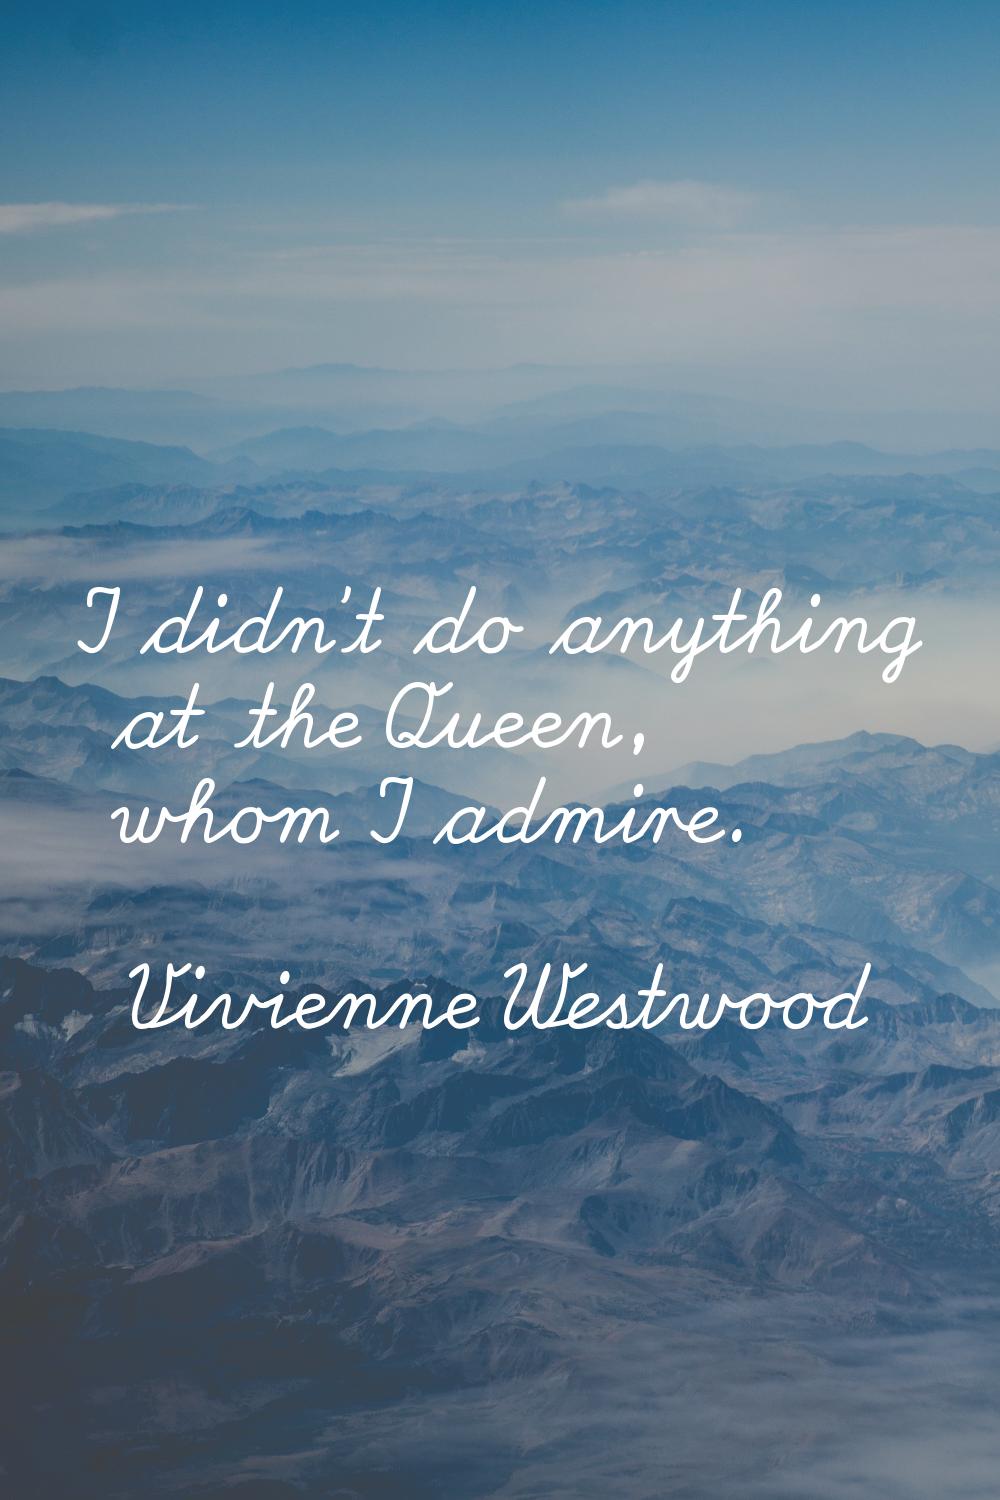 I didn't do anything at the Queen, whom I admire.